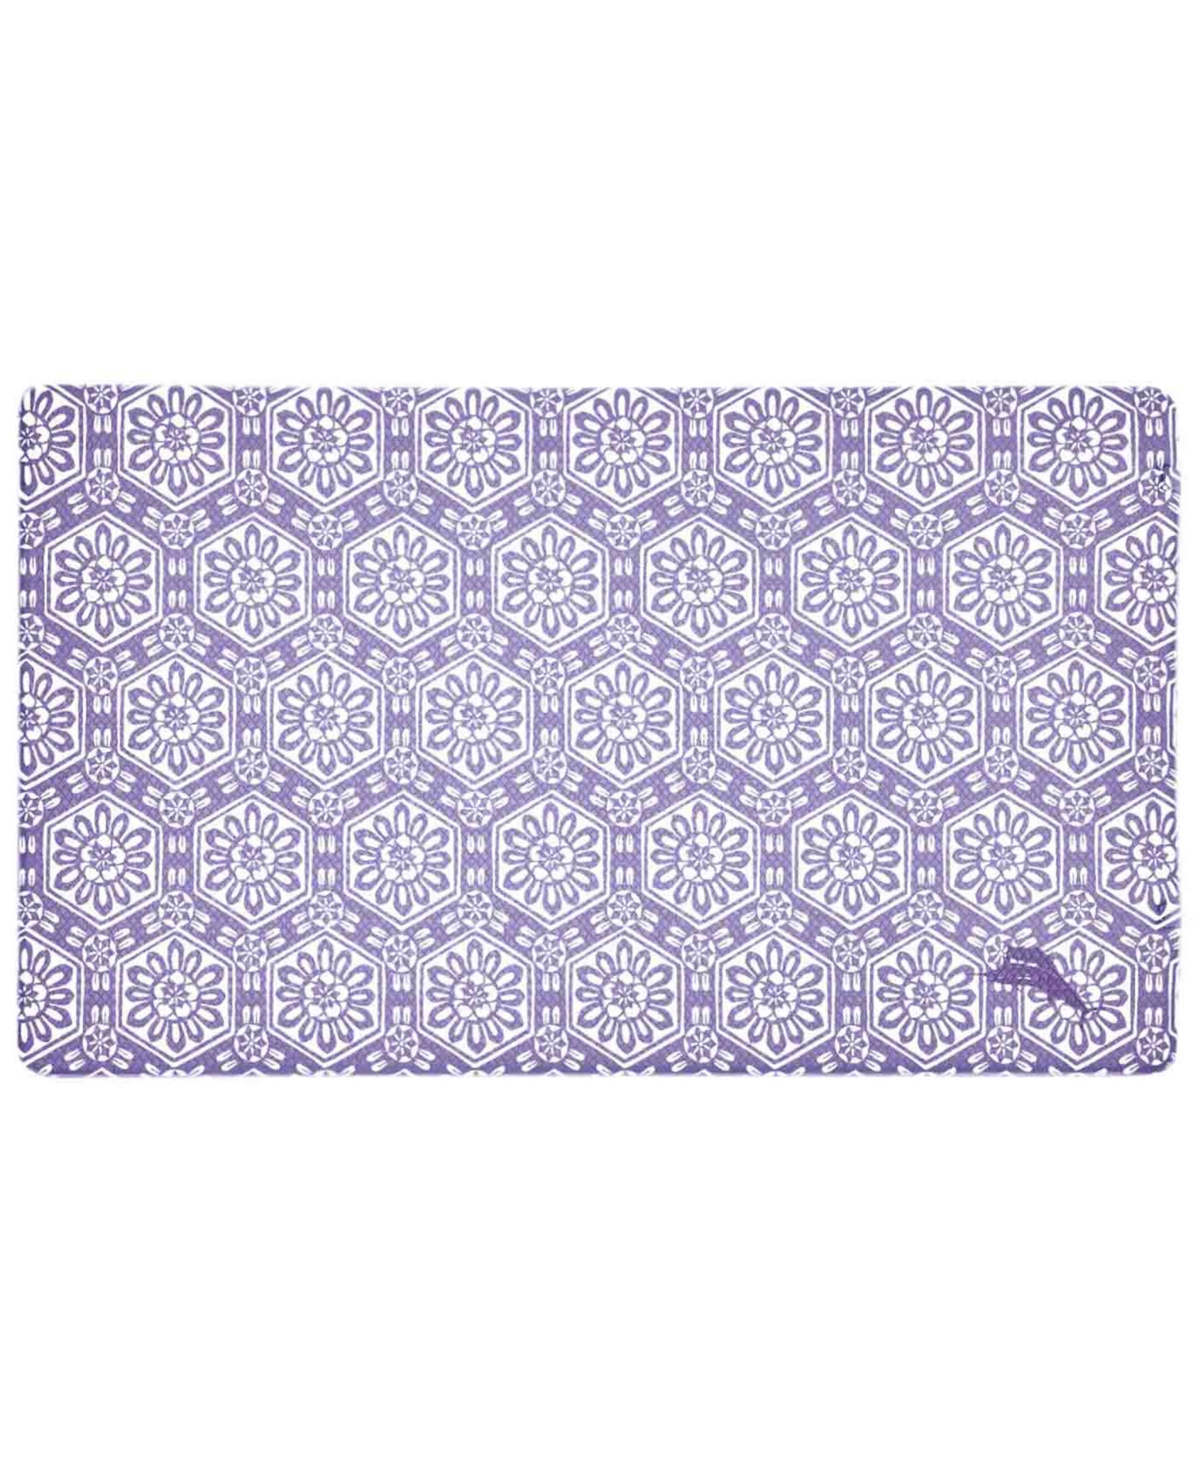 Tommy Bahama Printed Polyvinyl Chloride Fatigue-resistant Mat, 18" X 30" In Medallion Blue